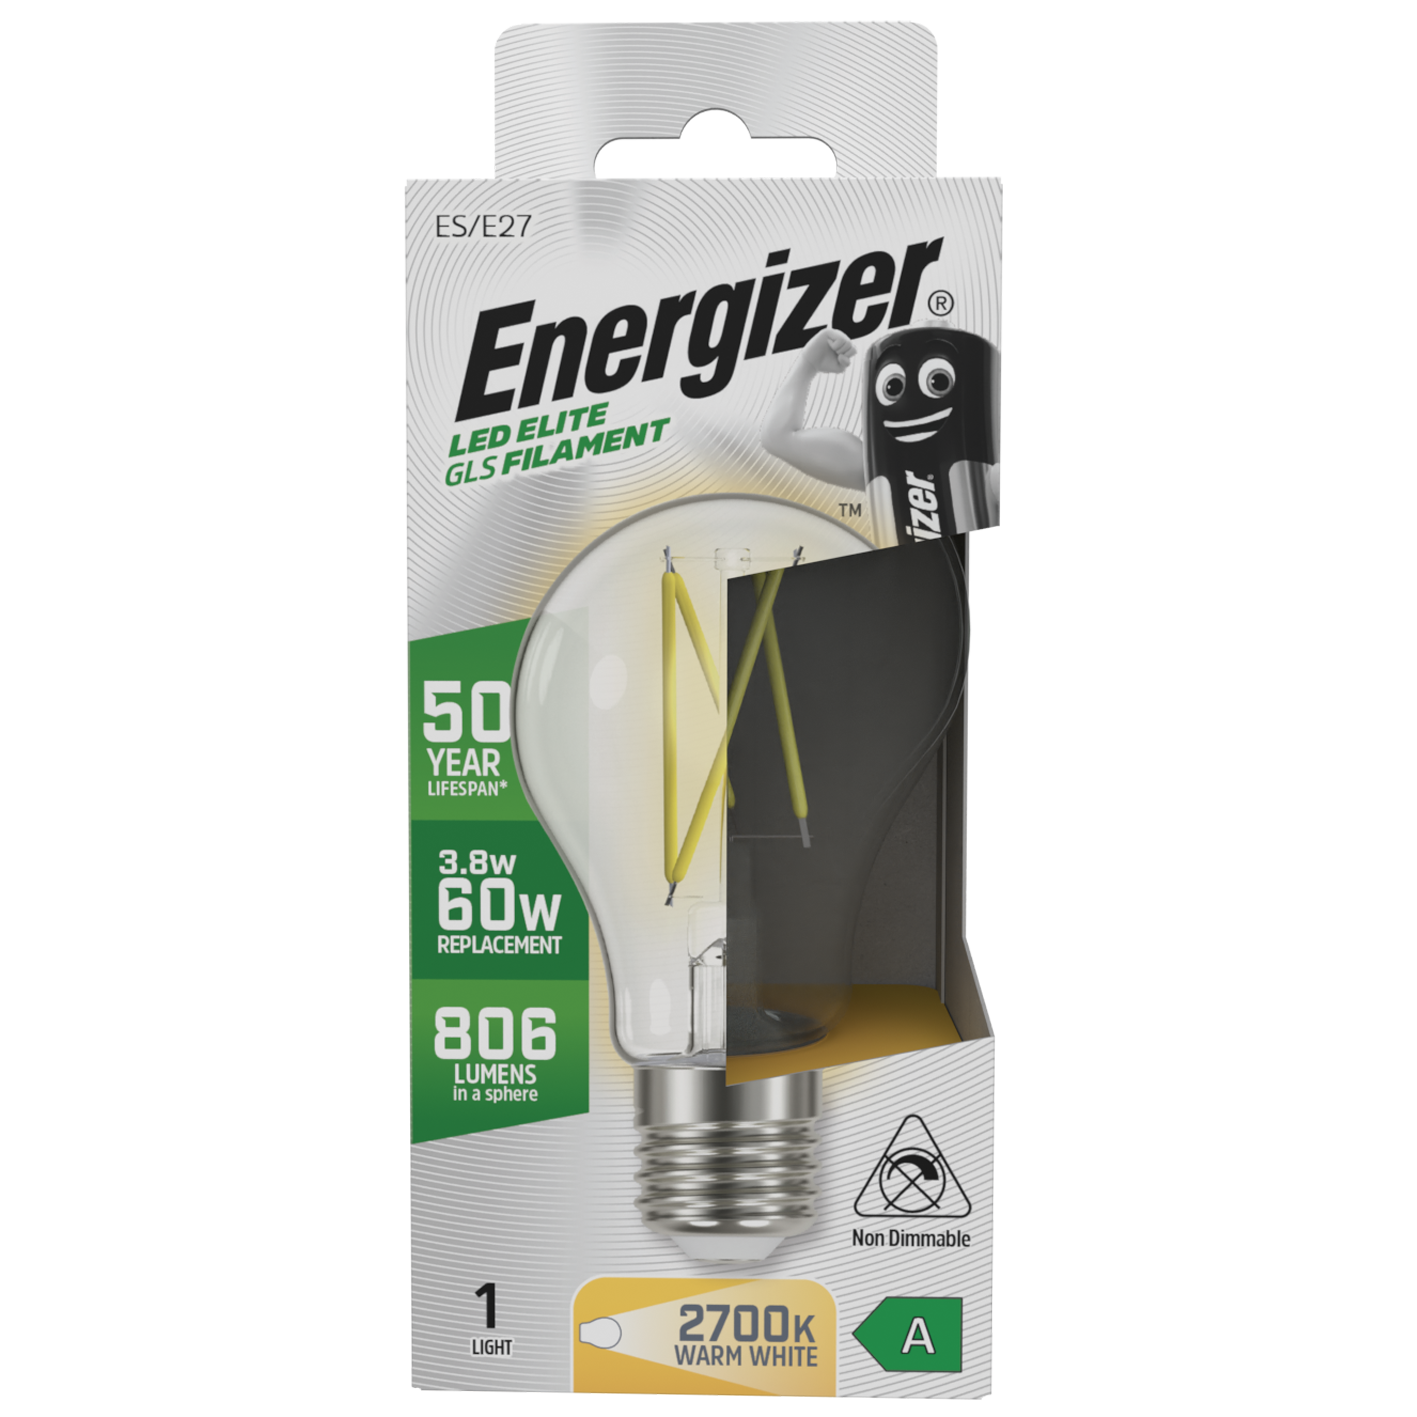 S29628 Energizer A Rated LED Elite GLS E27 Filament 806lm 3.8W 2700K (Warm White) - Box of 1